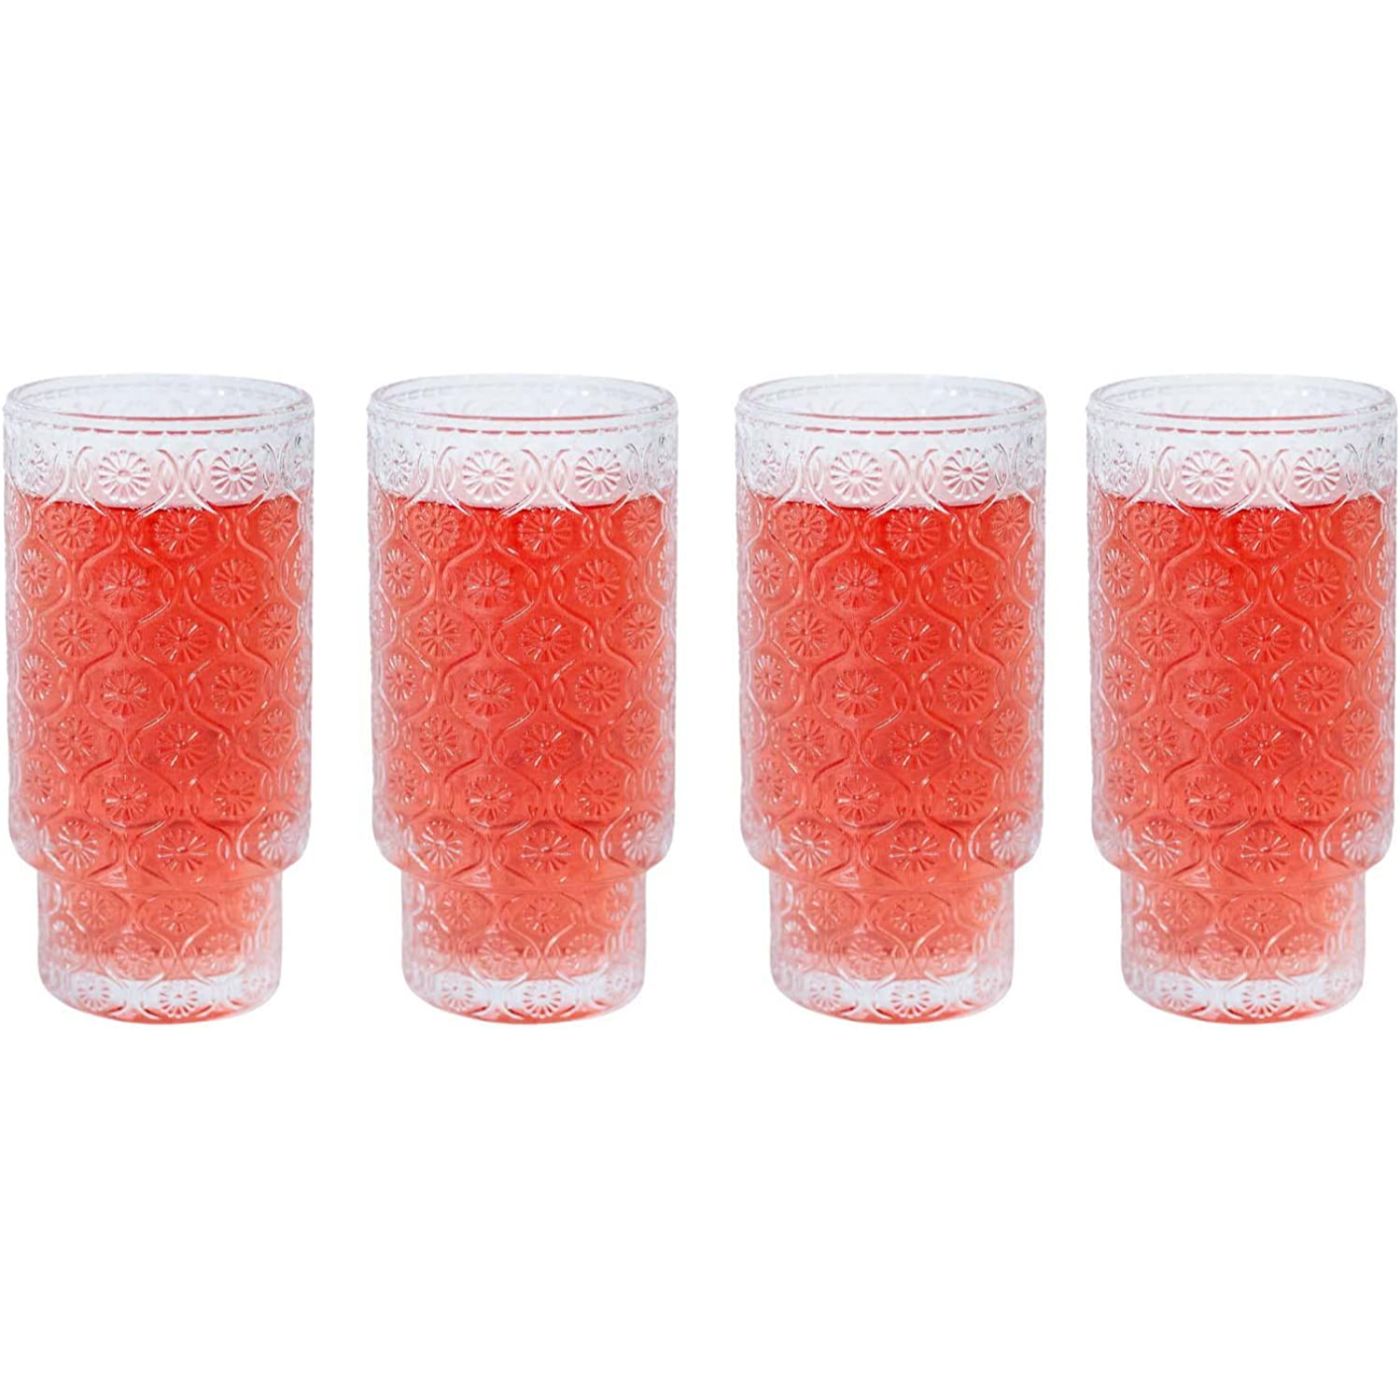 Storied Home 12 oz. Embossed Drinking Glass (Set of 4)